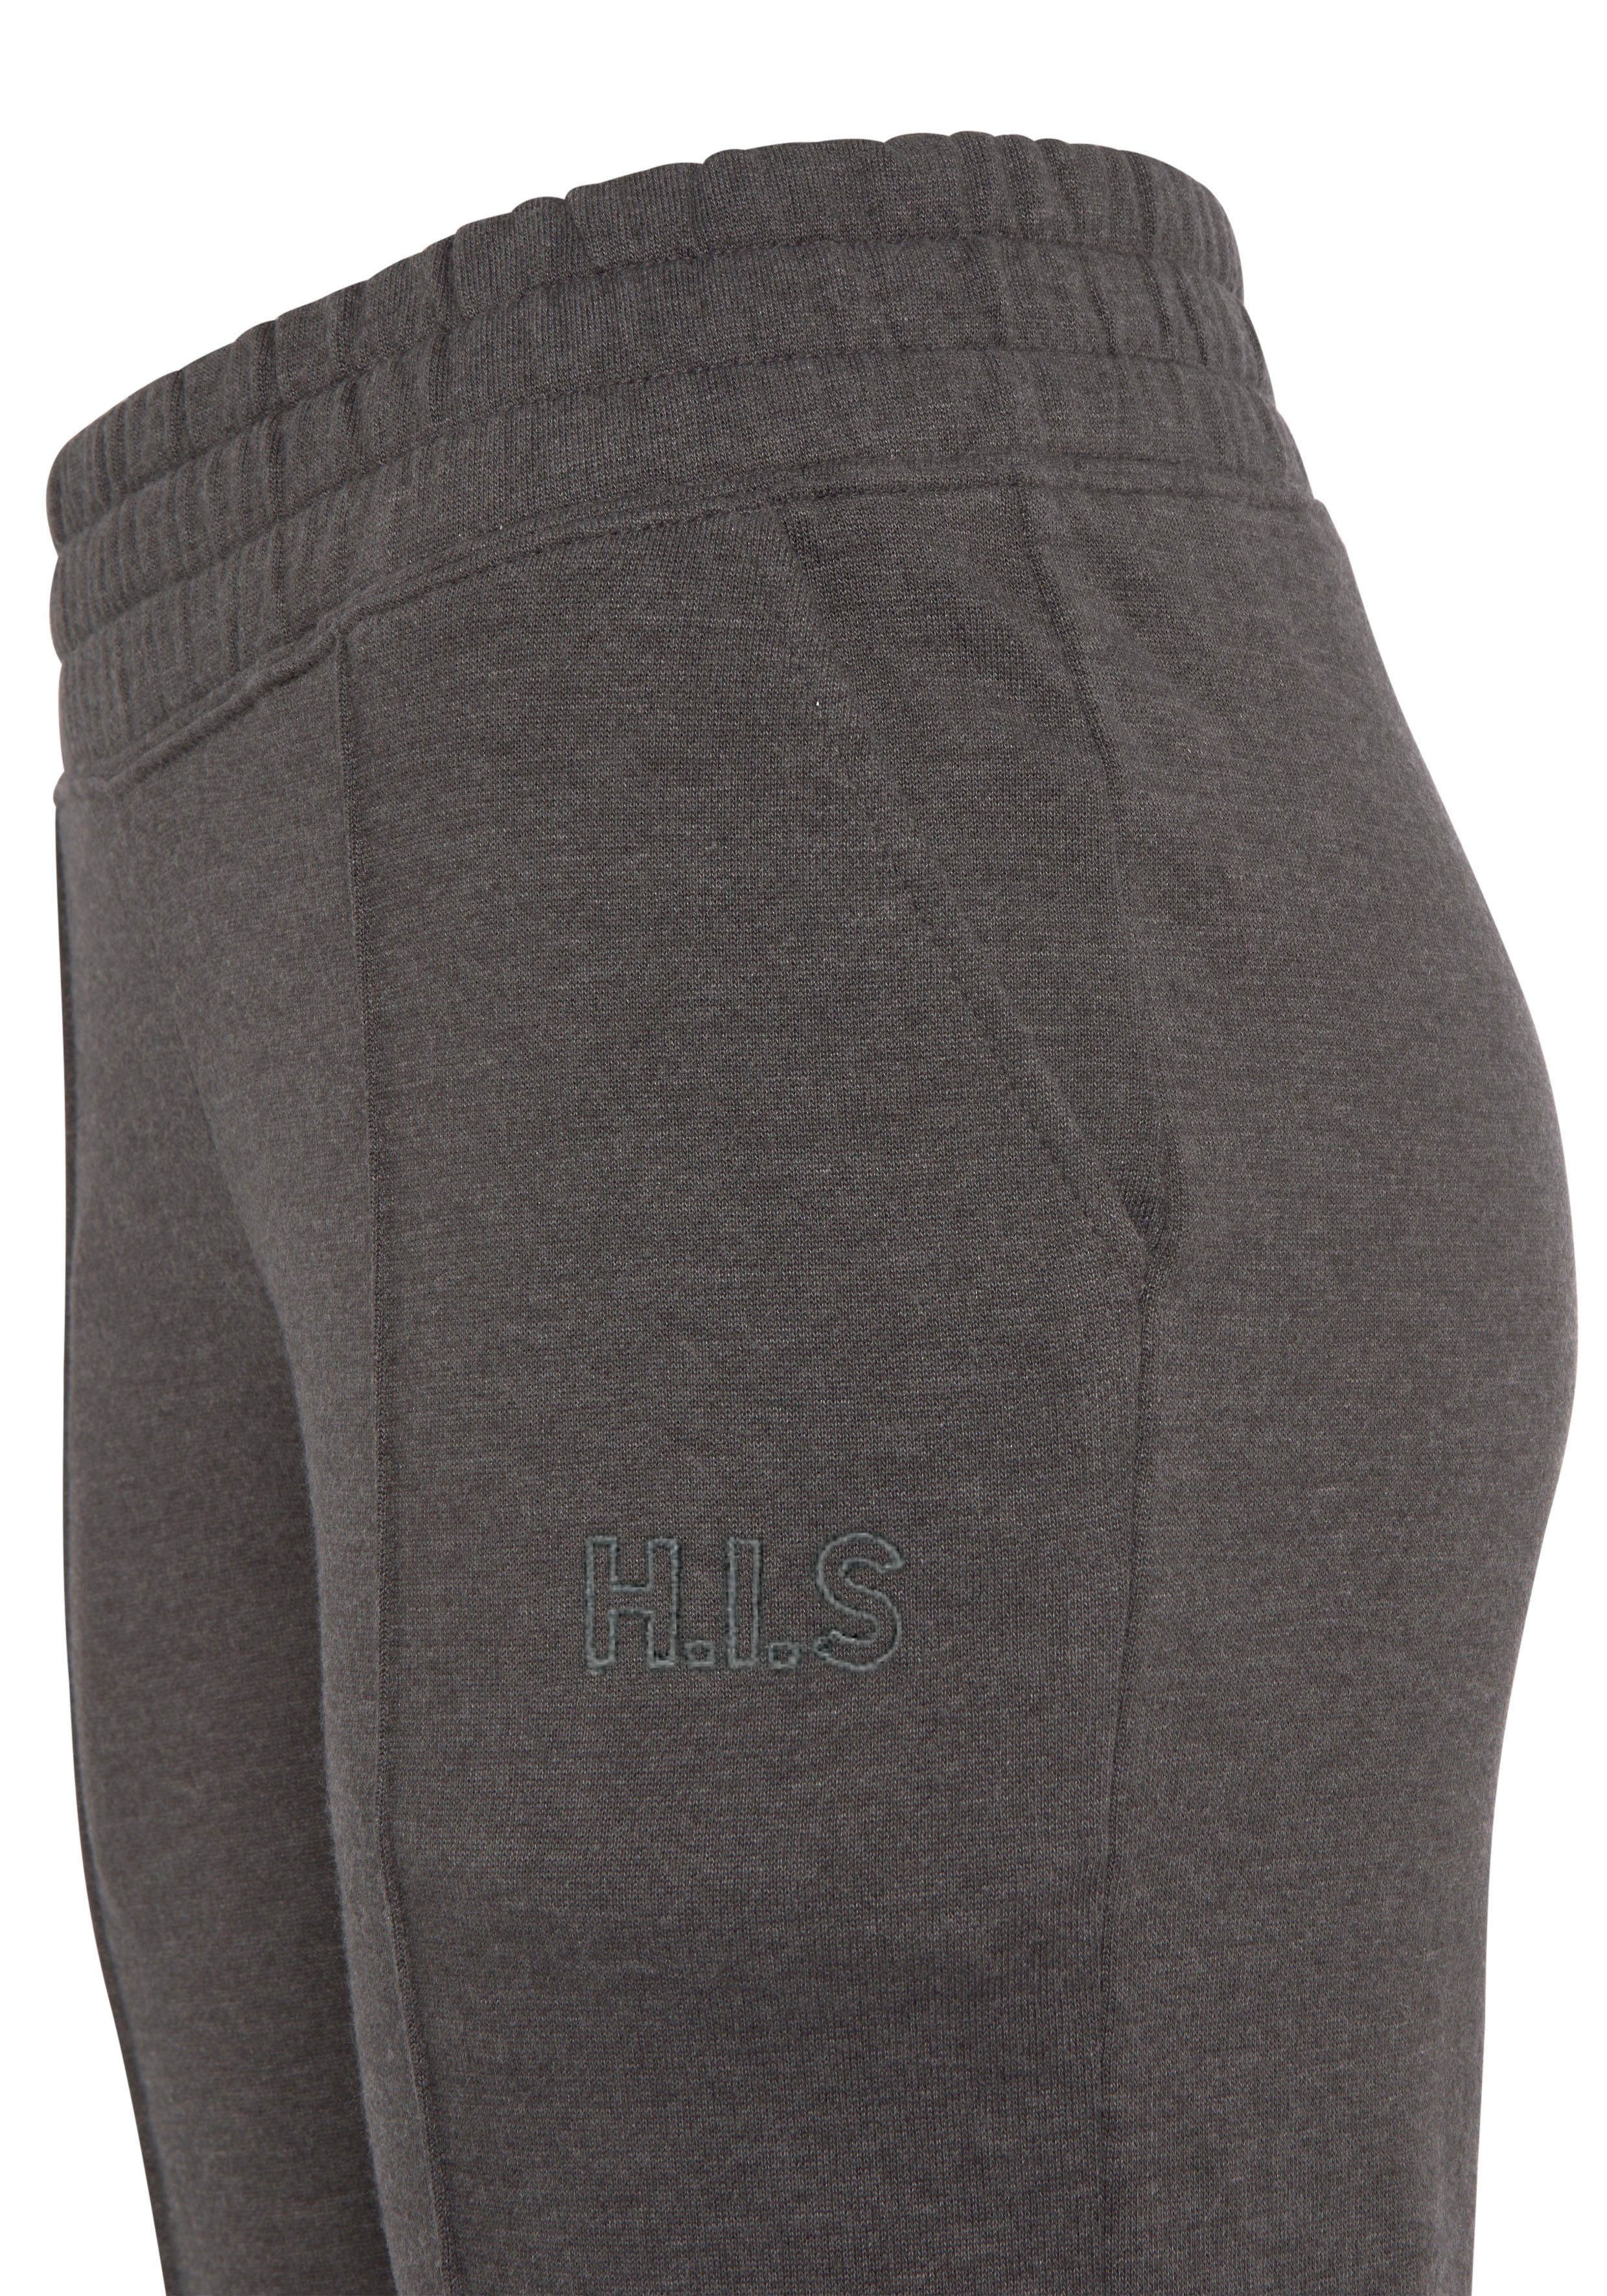 H.I.S Relaxhose mit Piping vorn, Loungeanzug anthrazit meliert